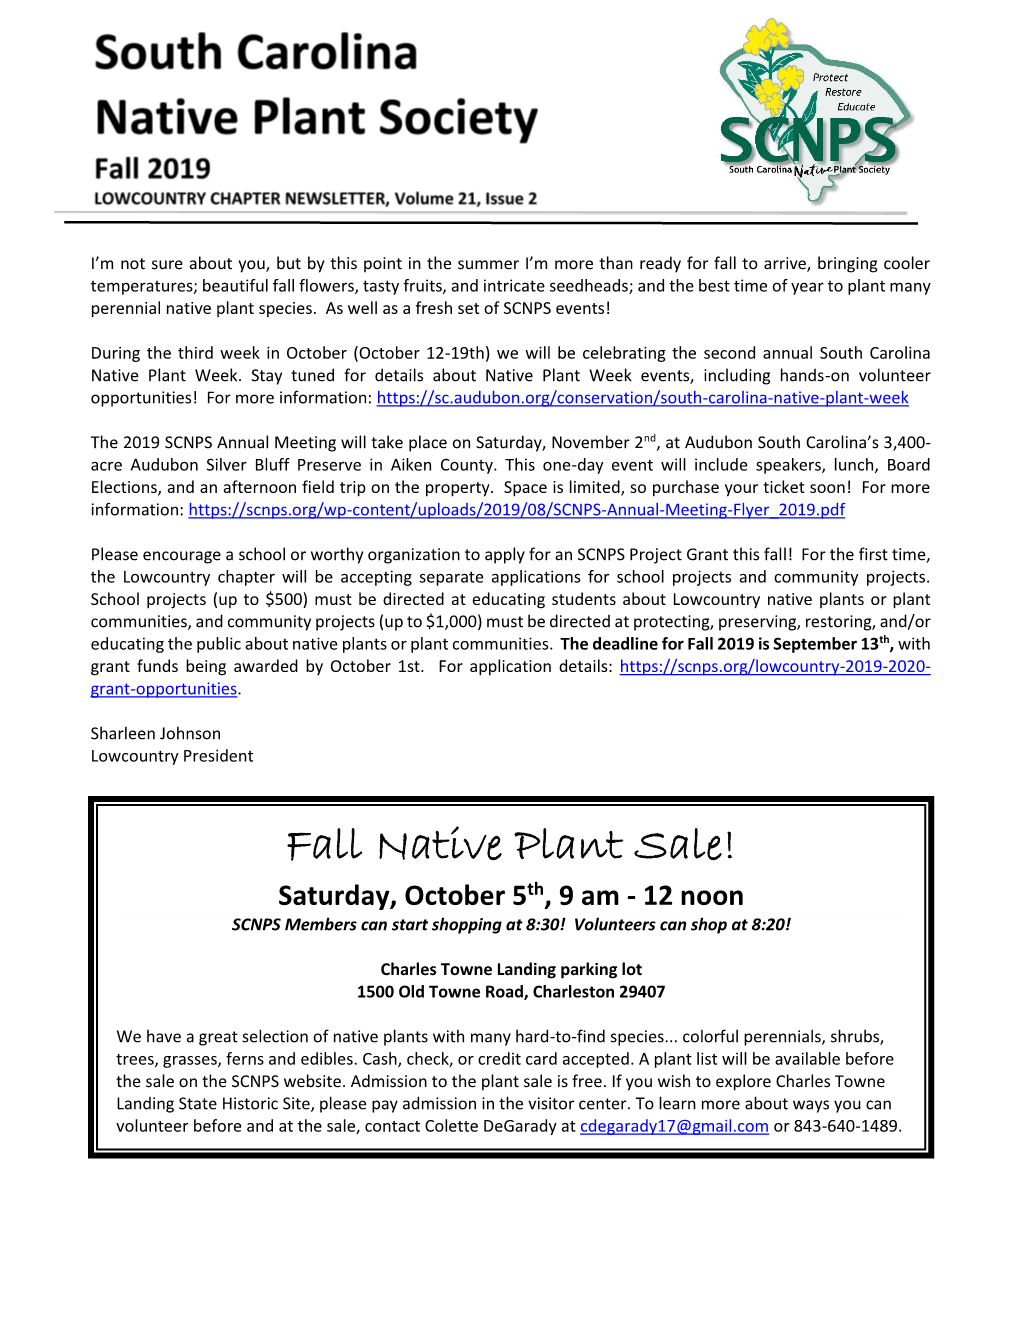 Fall Native Plant Sale! Saturday, October 5Th, 9 Am - 12 Noon SCNPS Members Can Start Shopping at 8:30! Volunteers Can Shop at 8:20!